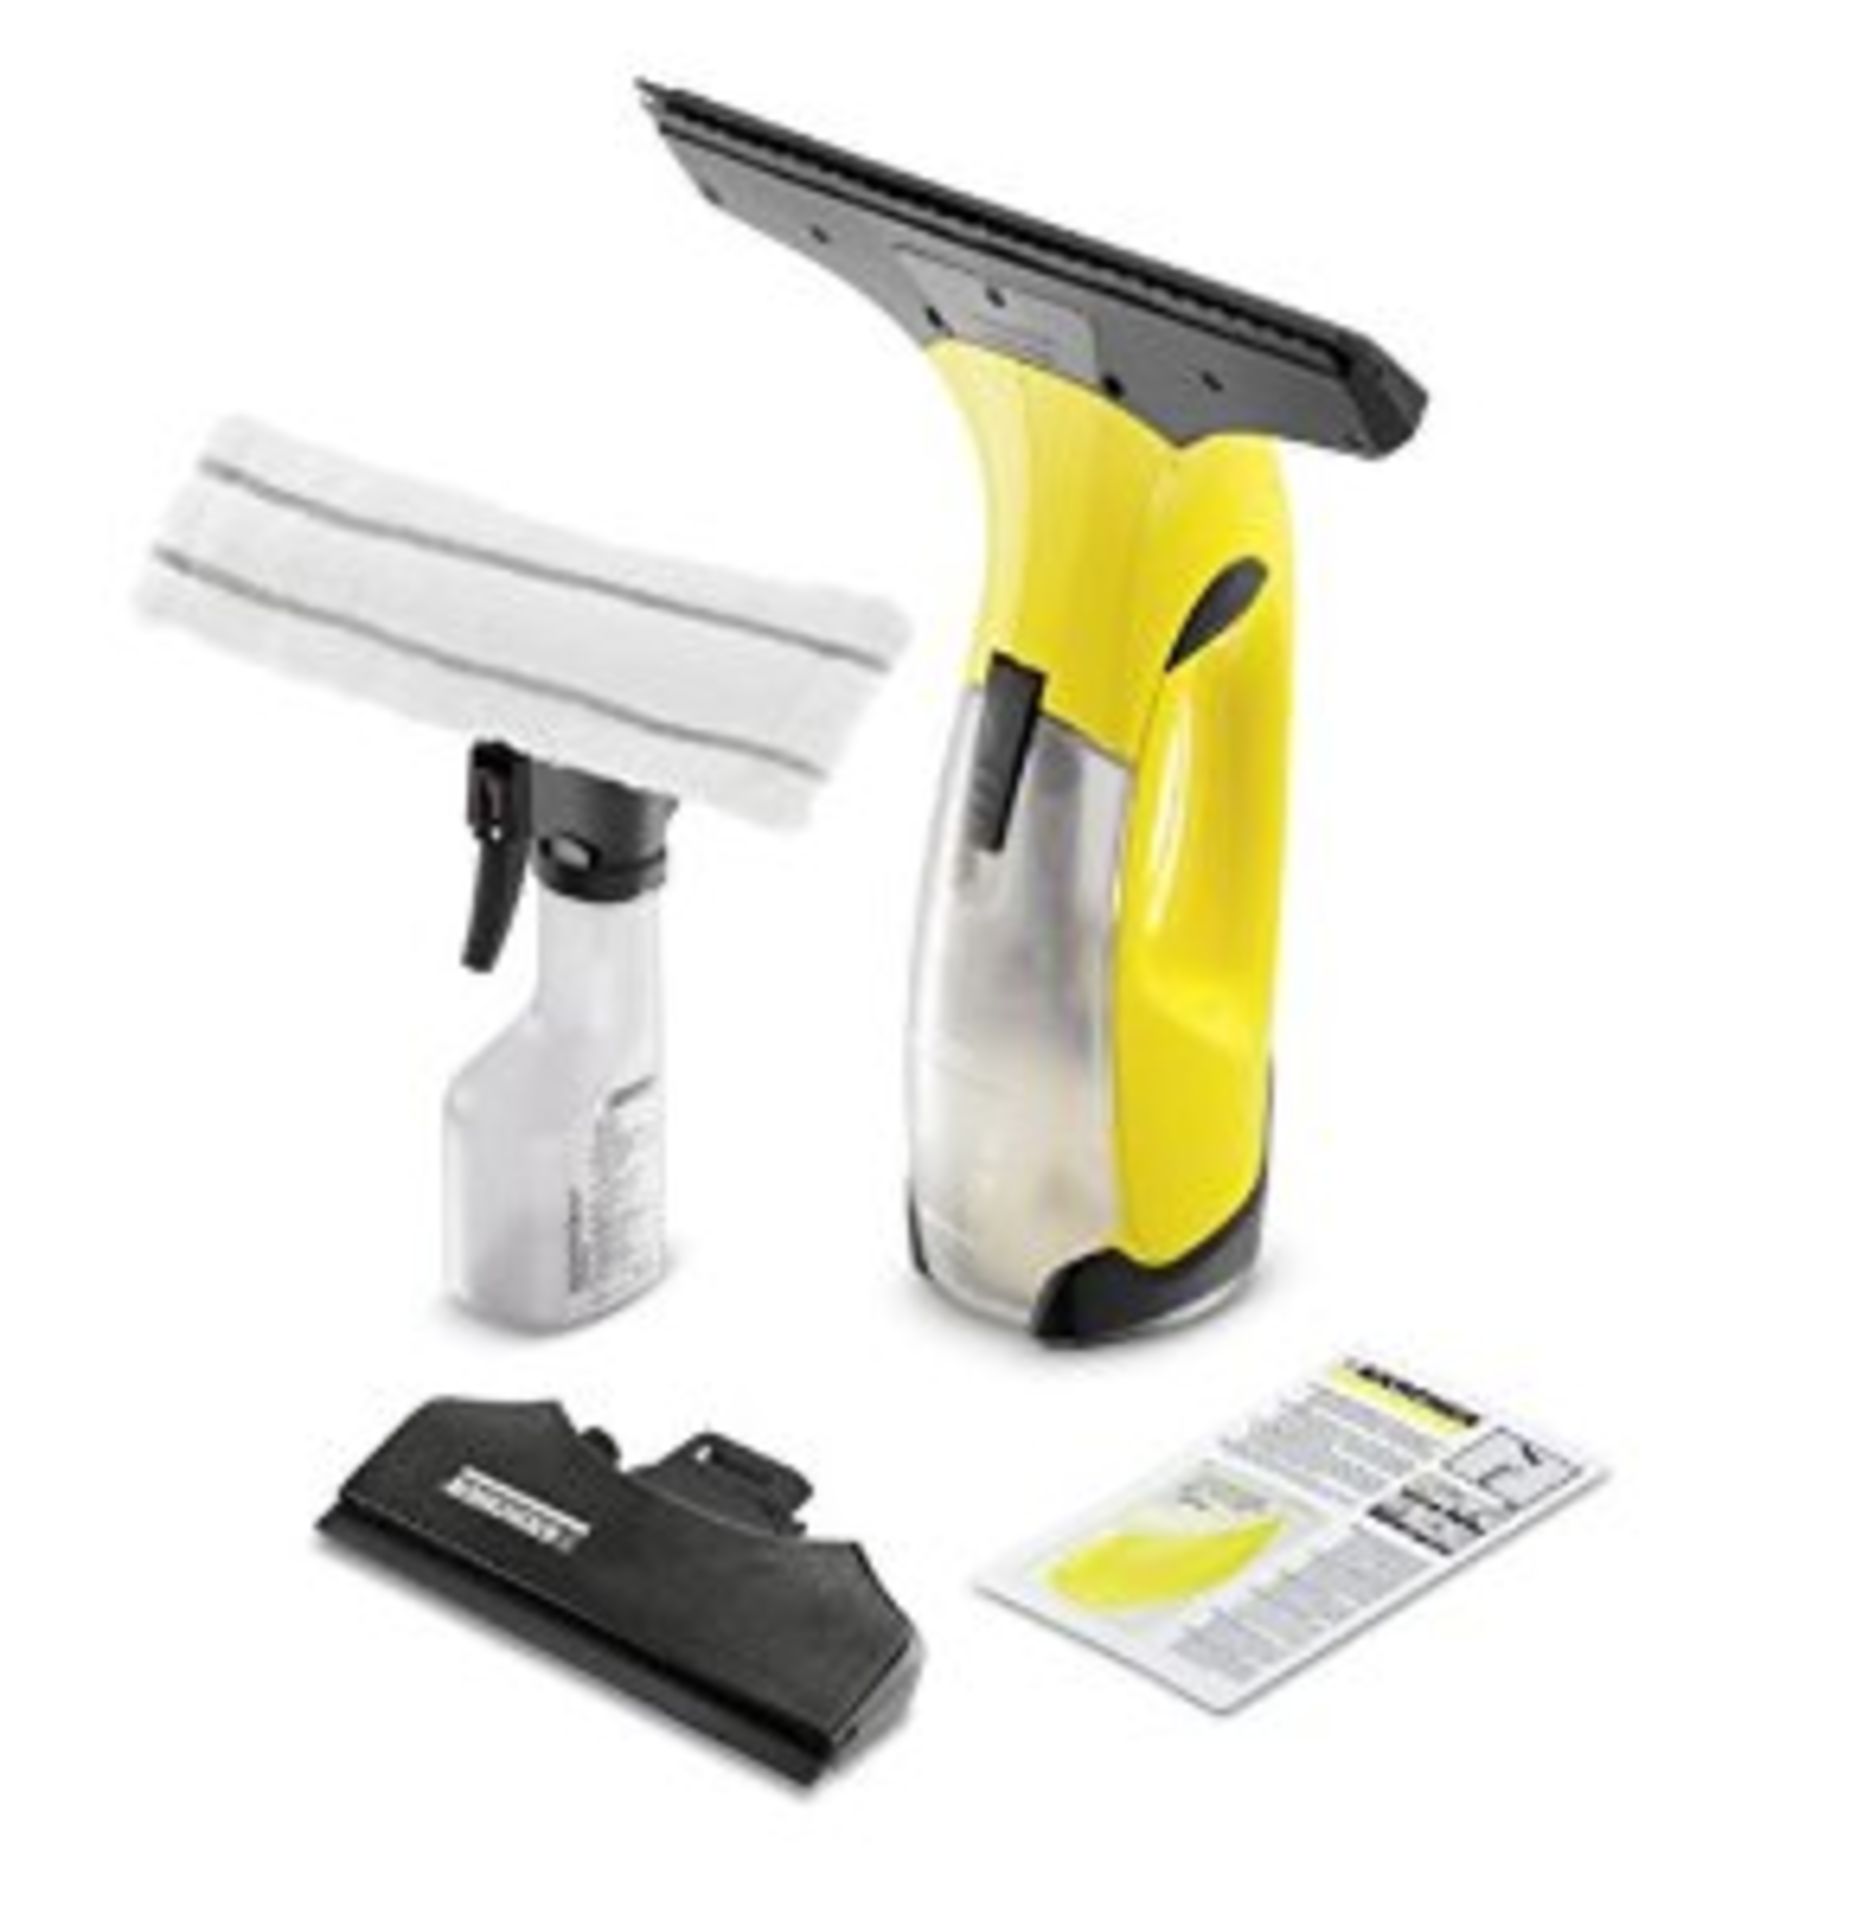 1 x BOXED KARCHER WV2 WINDOW VAC (20.5.16) *PLEASE NOTE THAT THE BID PRICE IS MULTIPLIED BY THE